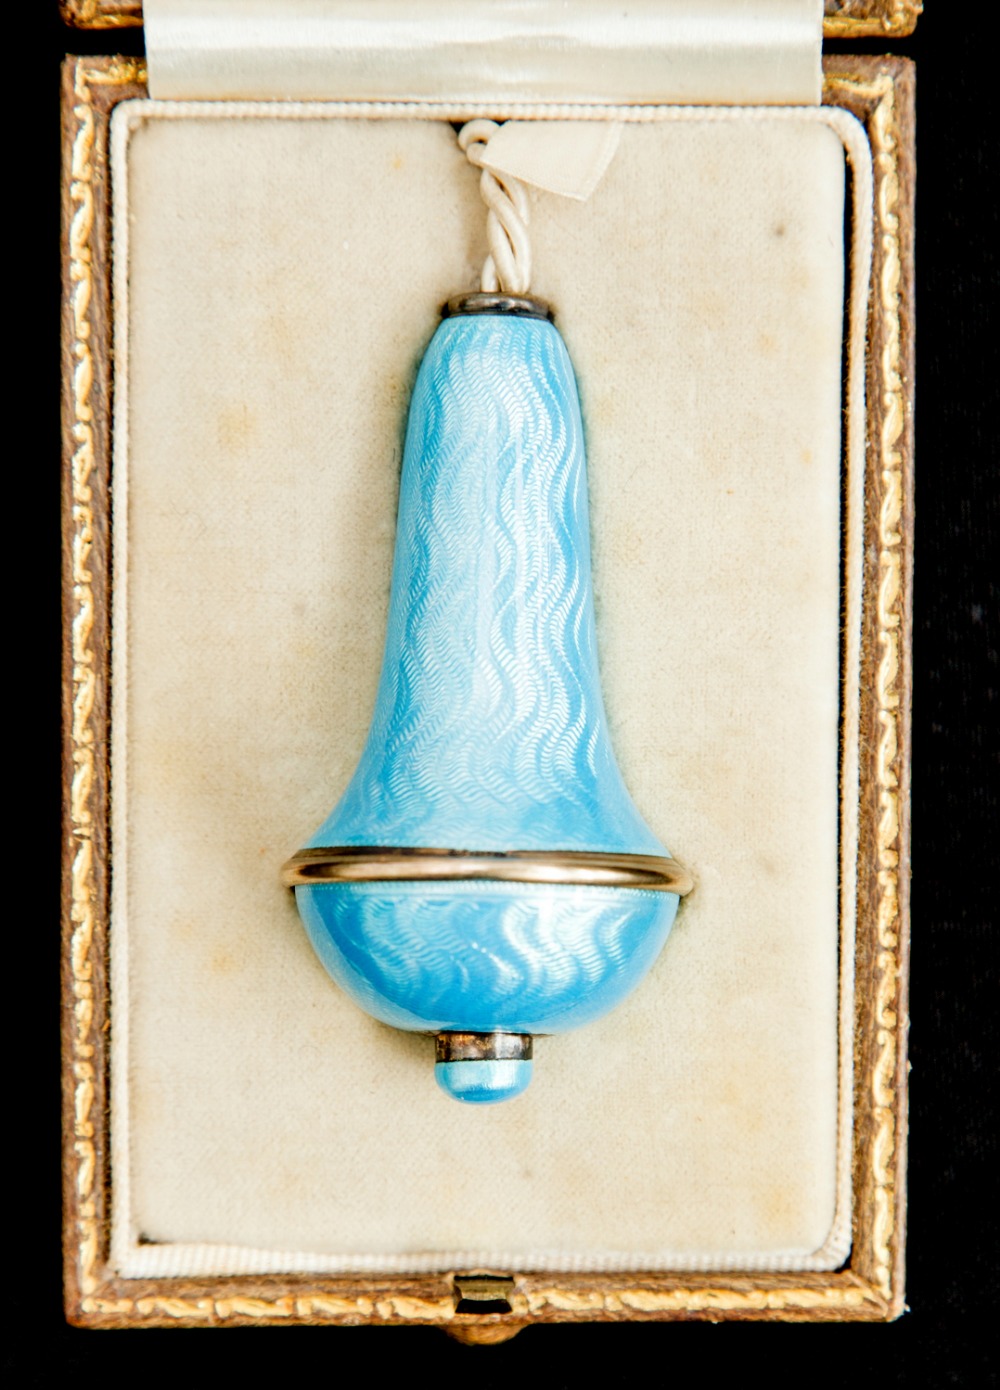 An Asprey silver gilt and guilloché enamel bell pull, with electrical contract, circa 1925, blue